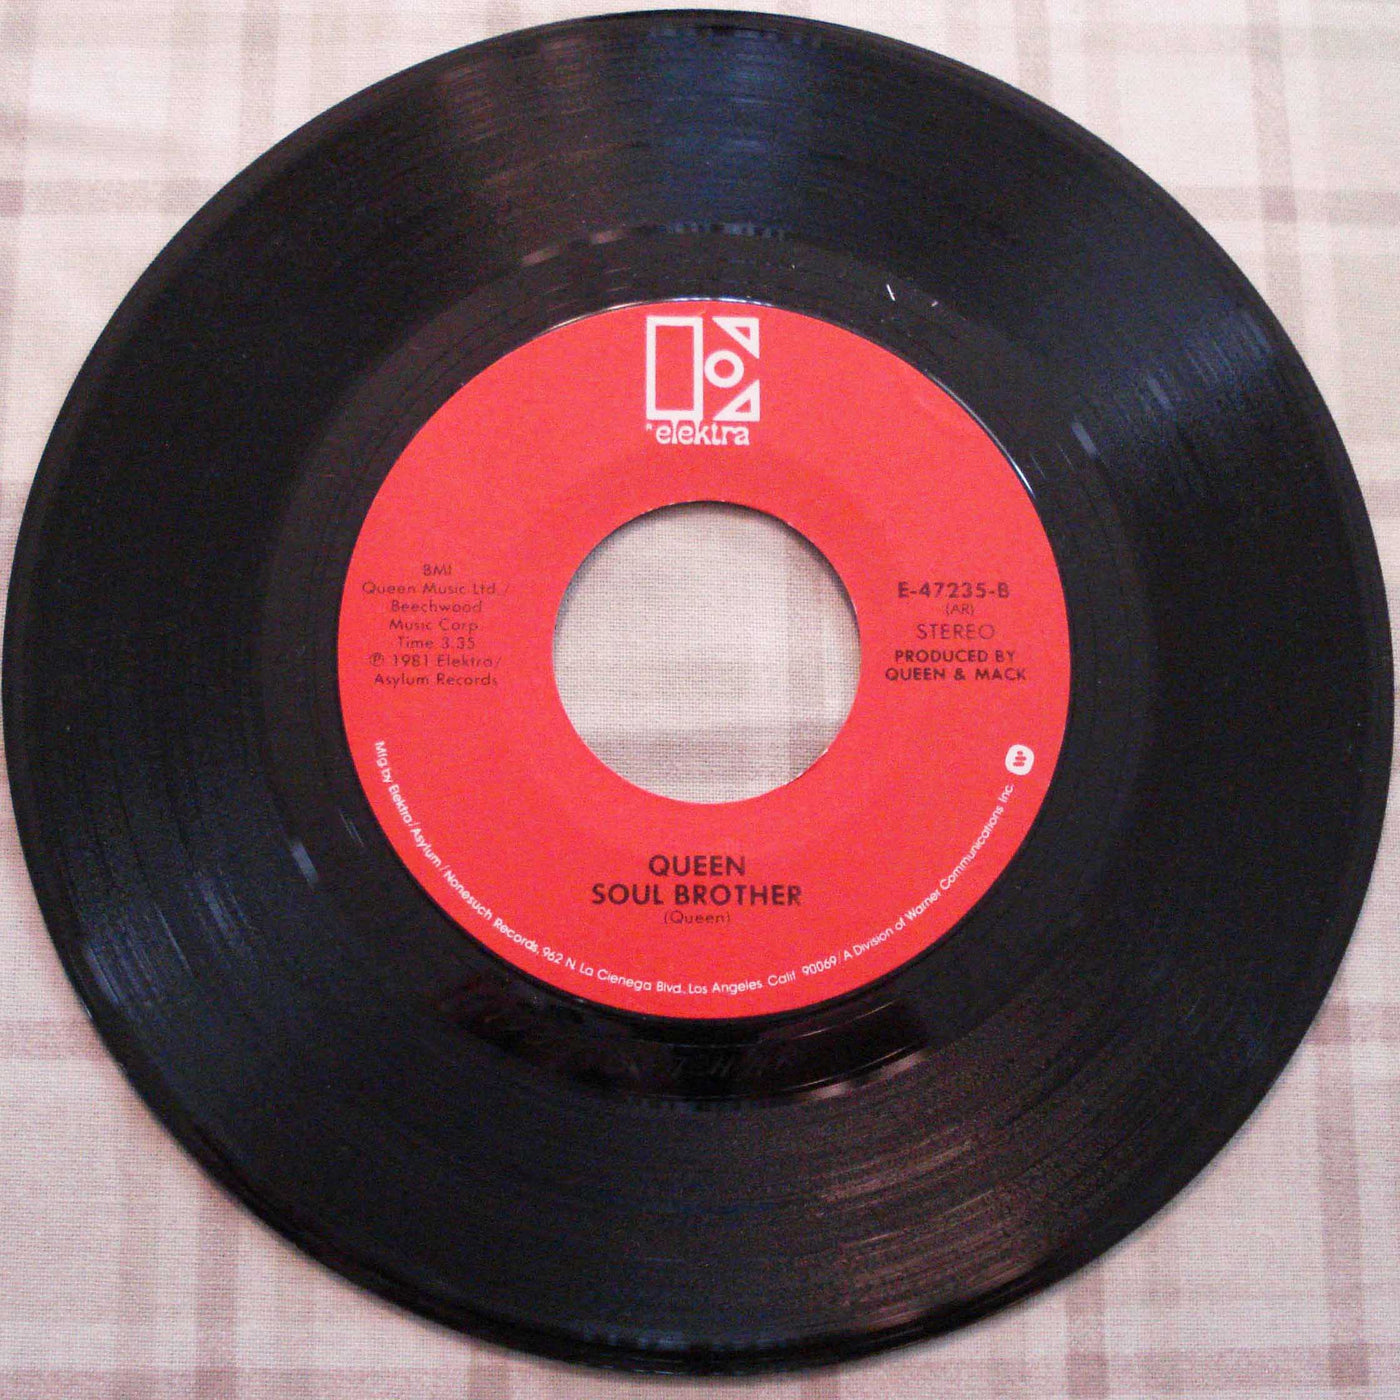 Queen and David Bowie - Under Pressure-Soul Brother (1981) Vinyl Single 45rpm E-47235